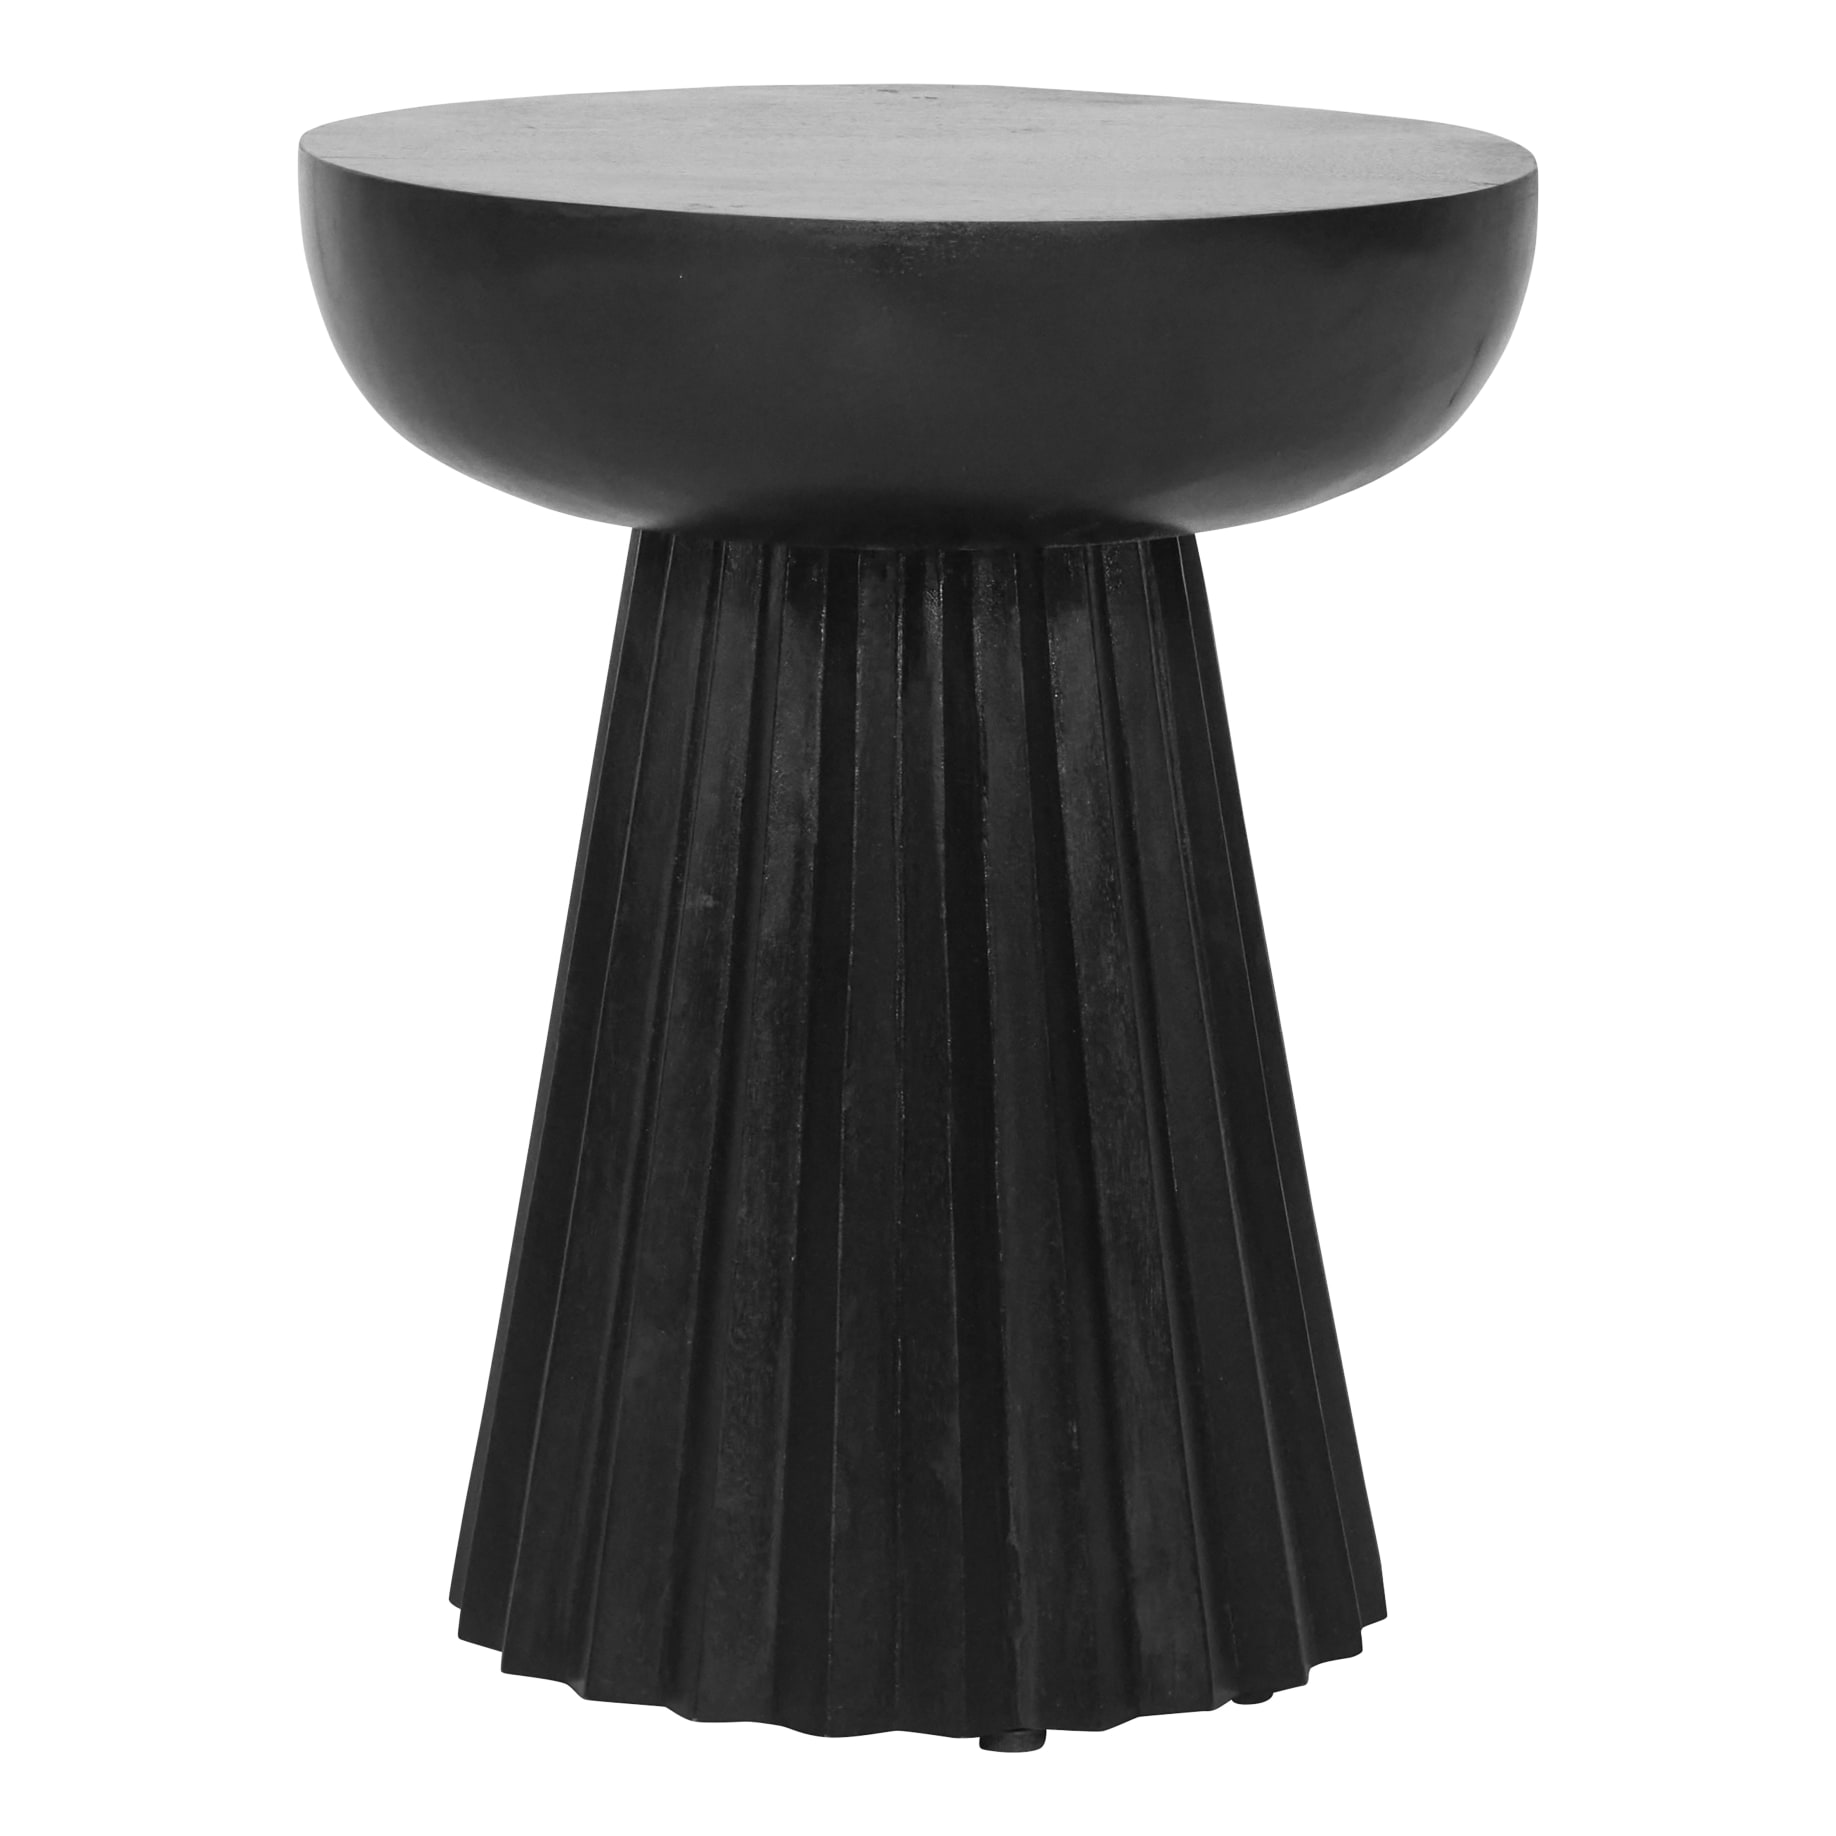 Remi Round Side Table 38cm in Mangowood Black